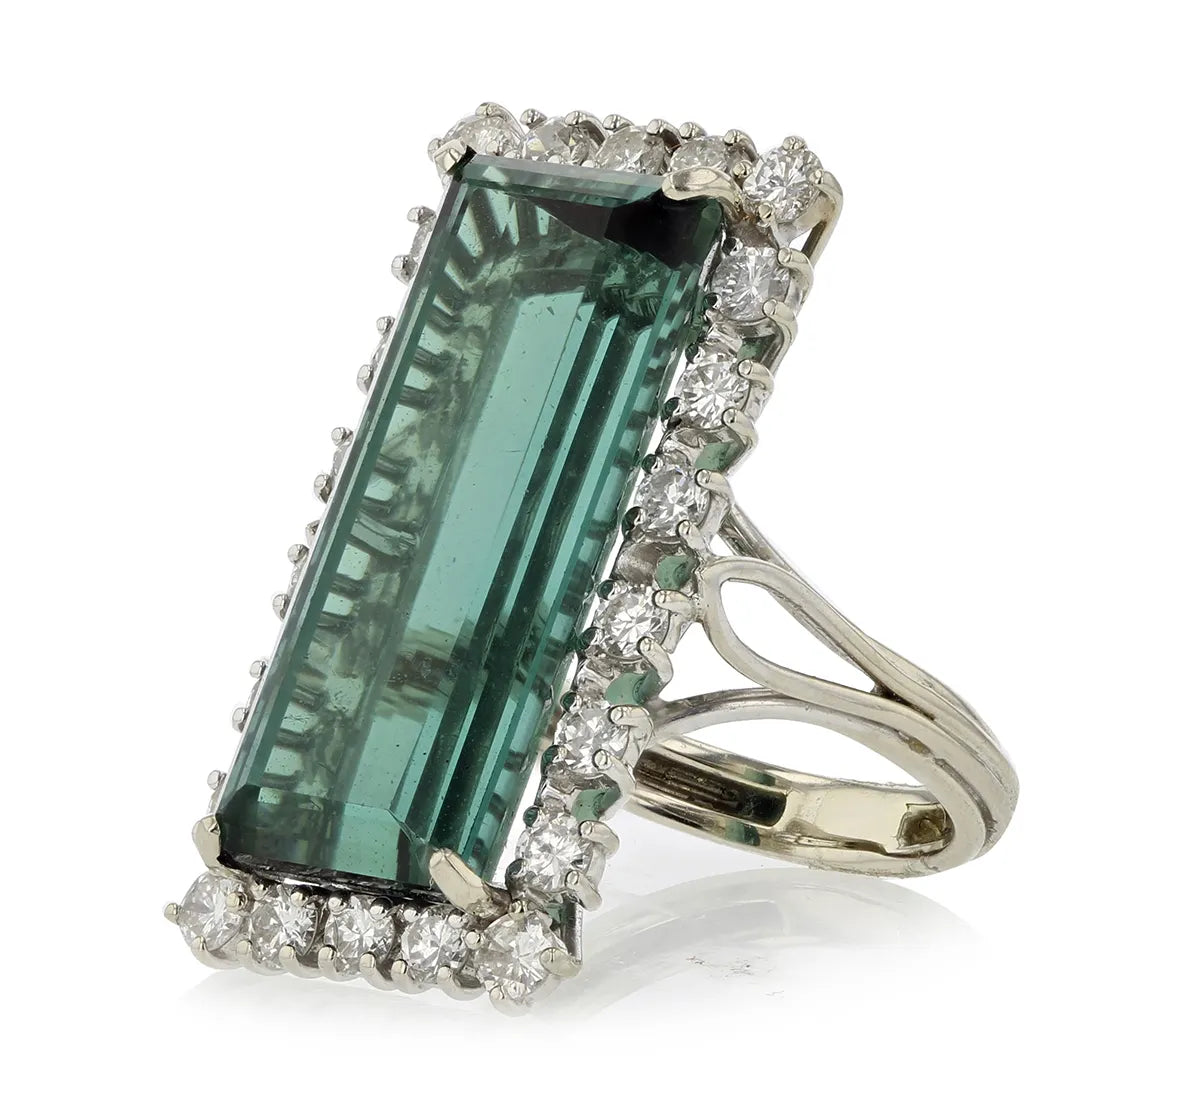 Celebrate the Past - Our Top 5 Estate Cocktail Rings for Fall